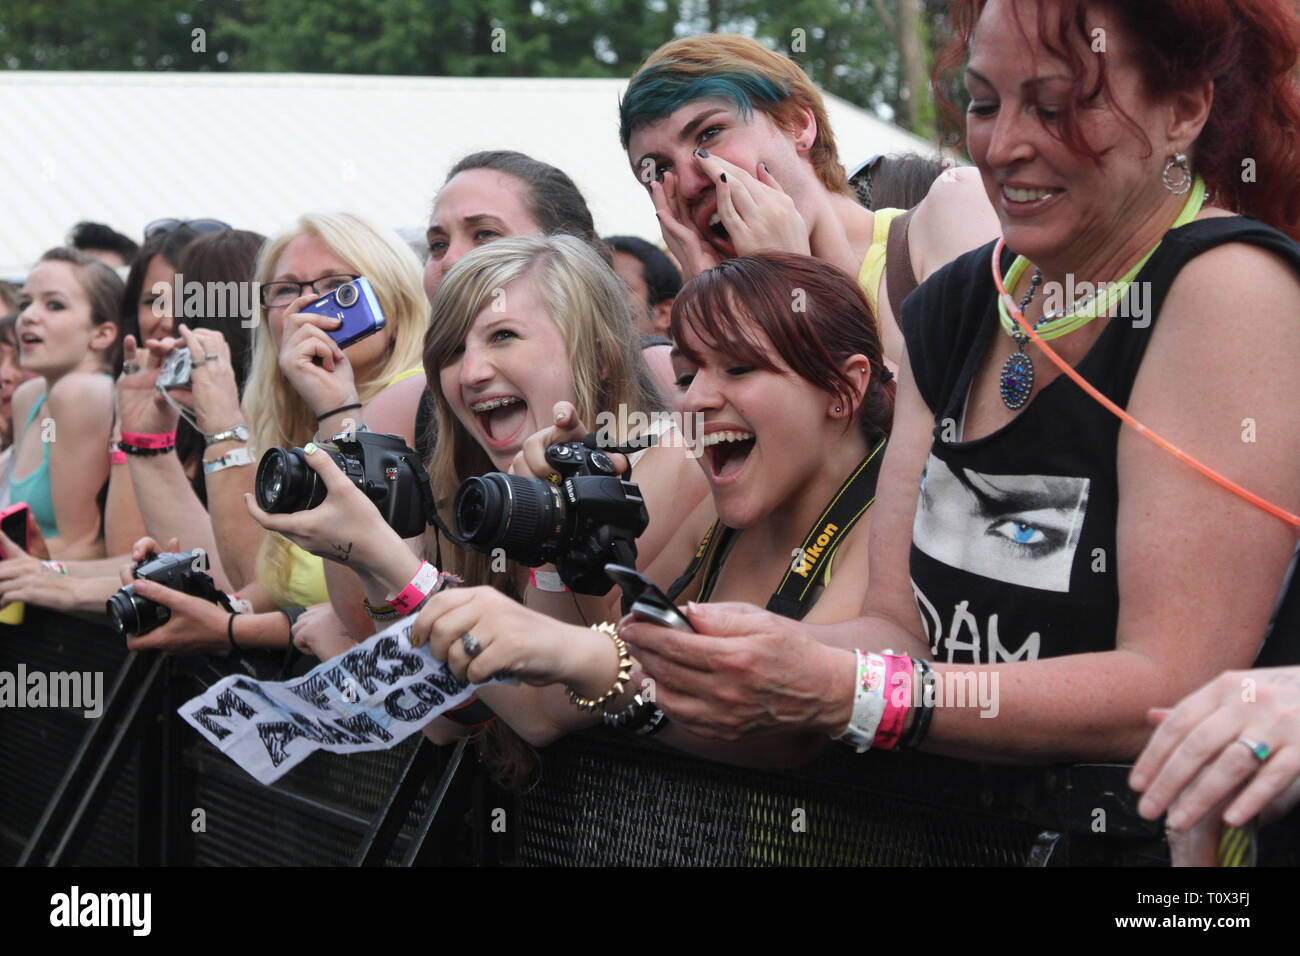 Happy front row fans are shown before the start of an outdoor concert performance. Stock Photo